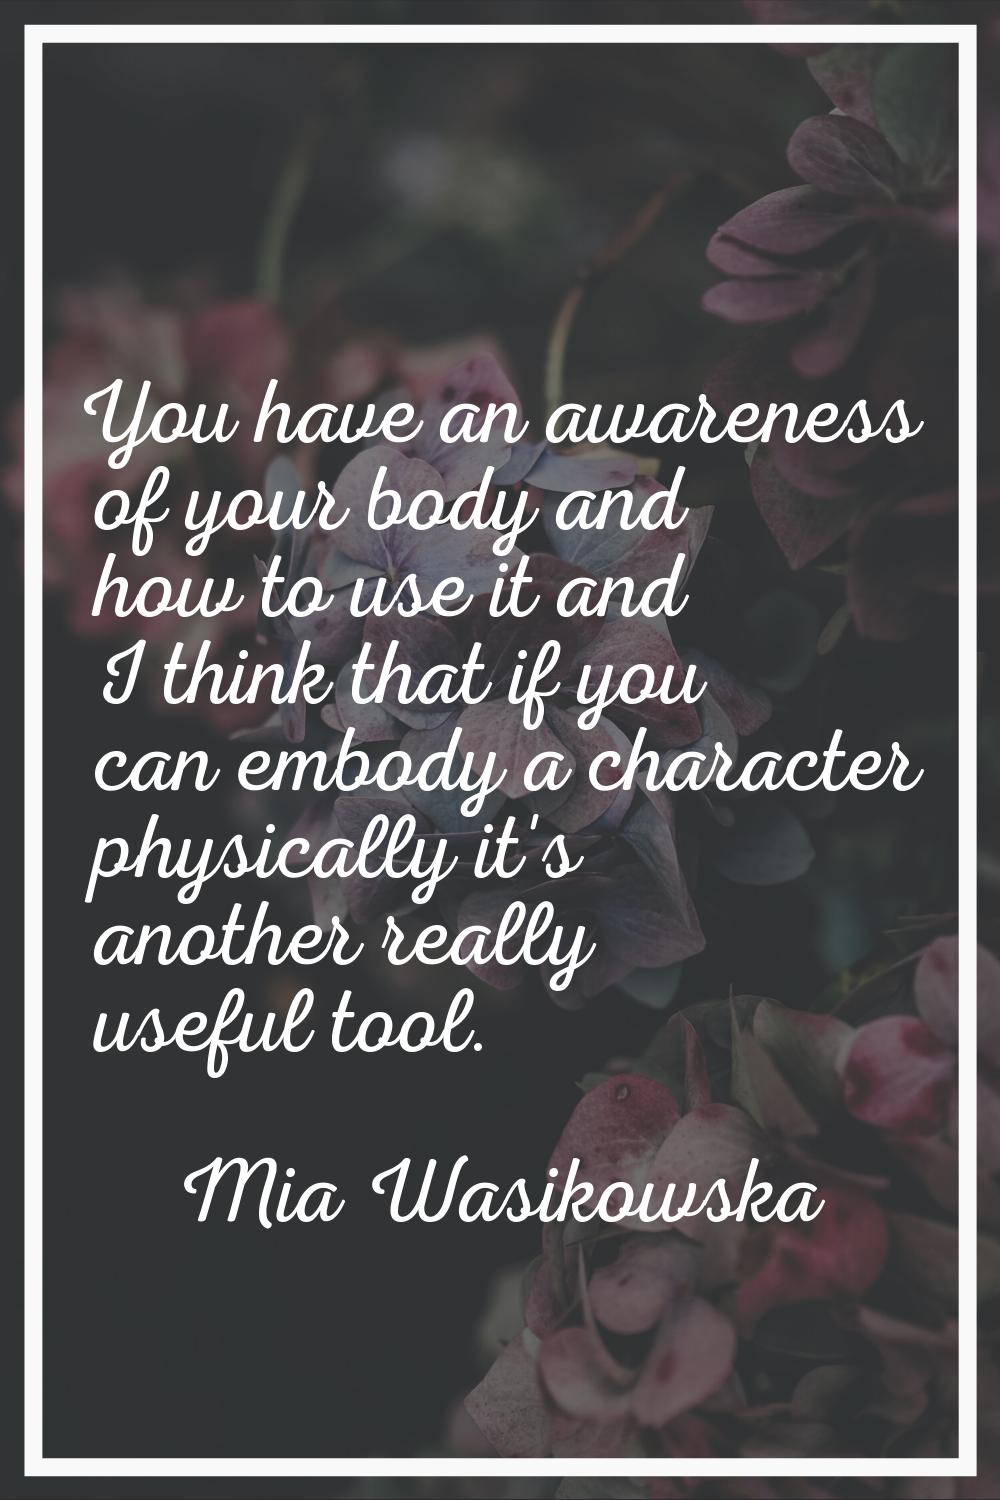 You have an awareness of your body and how to use it and I think that if you can embody a character